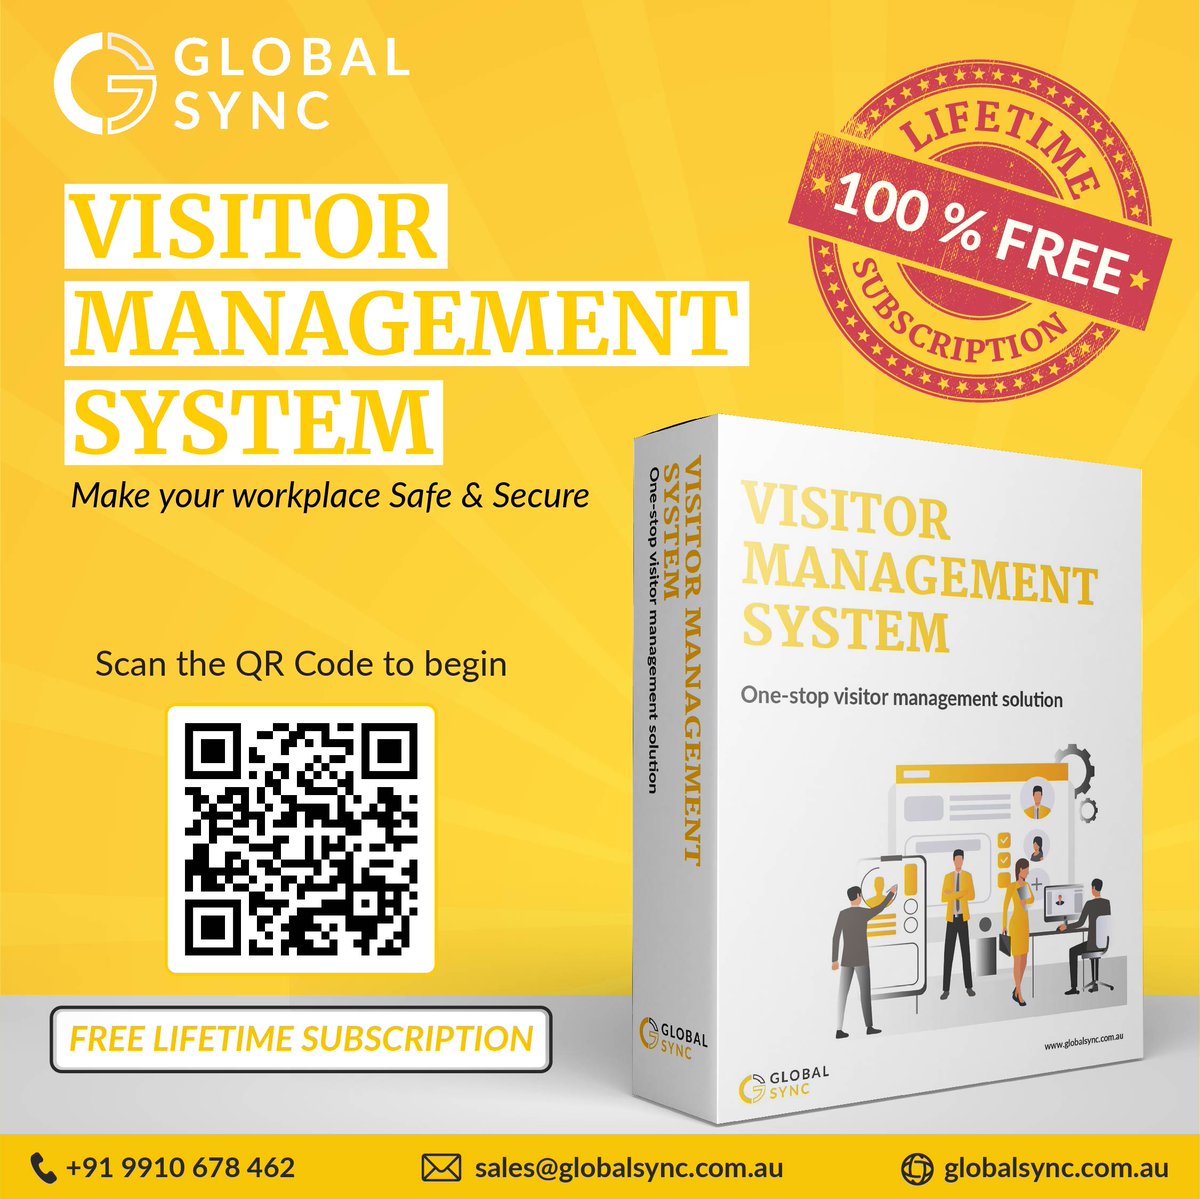 A #VisitorManagementSystem (VMS) makes your workplace safer & more secure.
 
Click on the link & get our Visitor Management System free of cost!
𝐅𝐫𝐞𝐞 𝐒𝐢𝐠𝐧 𝐔𝐩: bit.ly/3wopFYK

To know more, call us today at +91 9910 678 462 Or email us at sales@globalsync.com.au